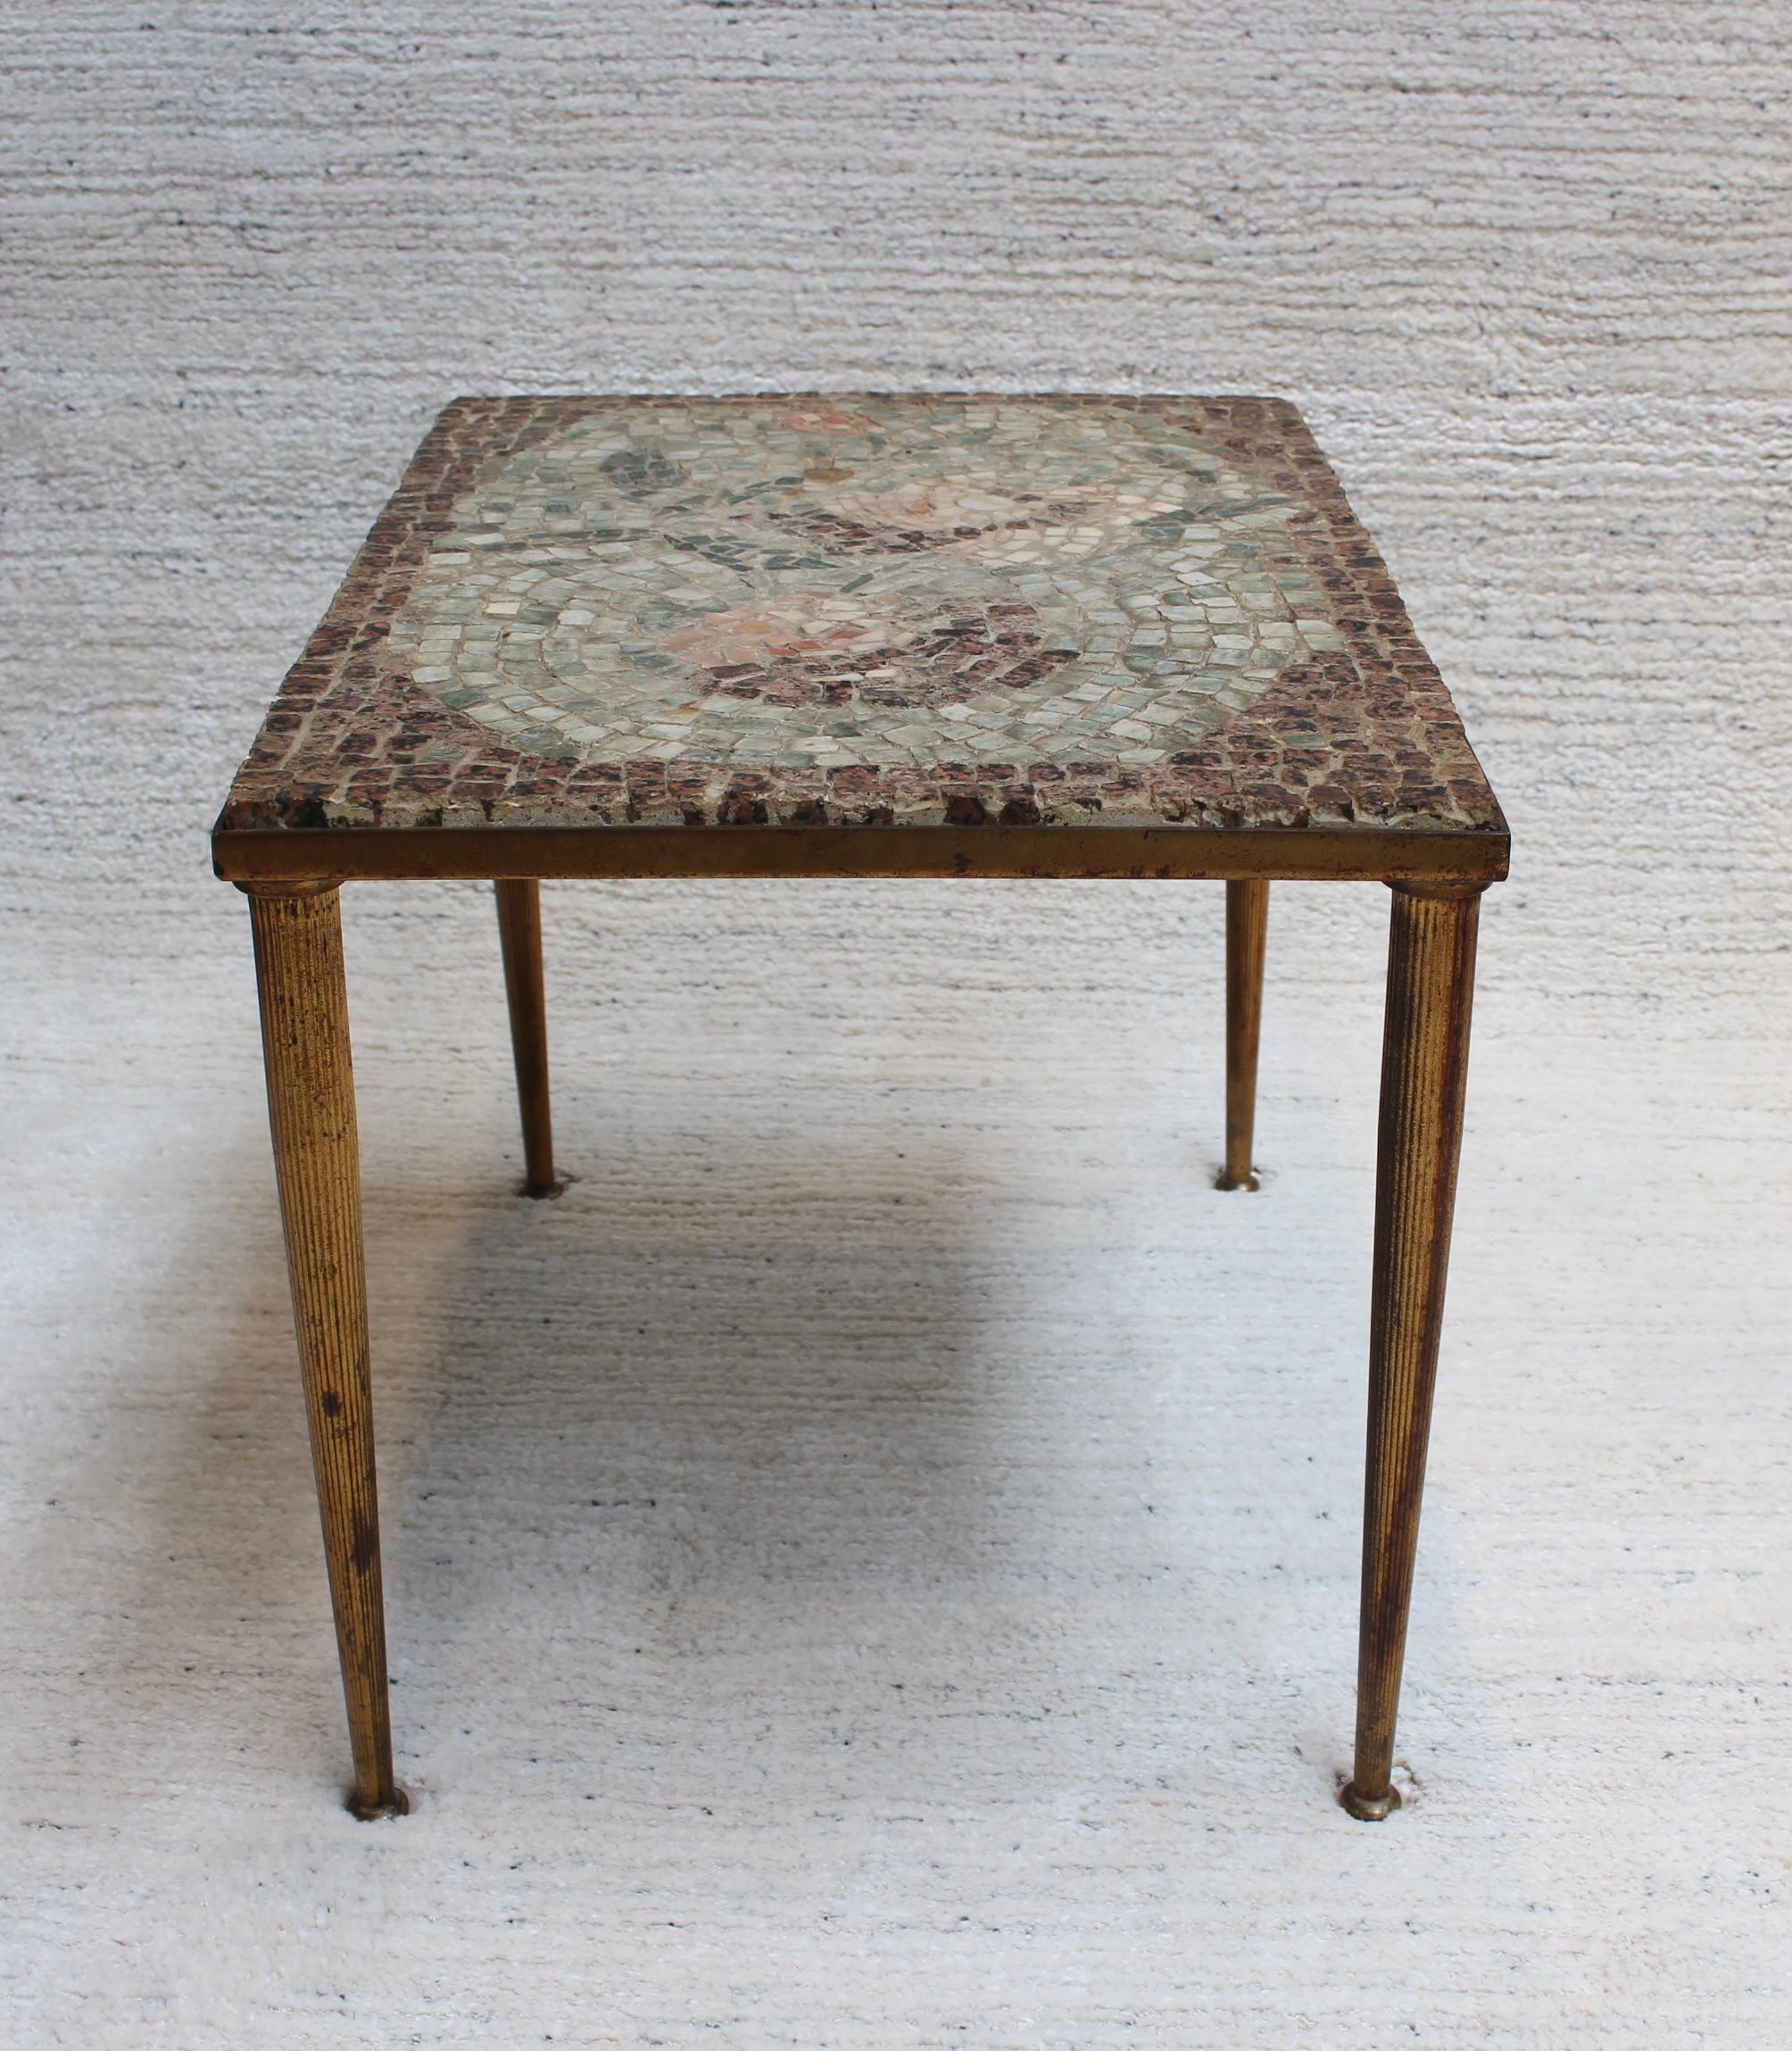 Vintage Low Table with Italian Style Mosaic Top, 'circa 1950s' In Fair Condition For Sale In London, GB